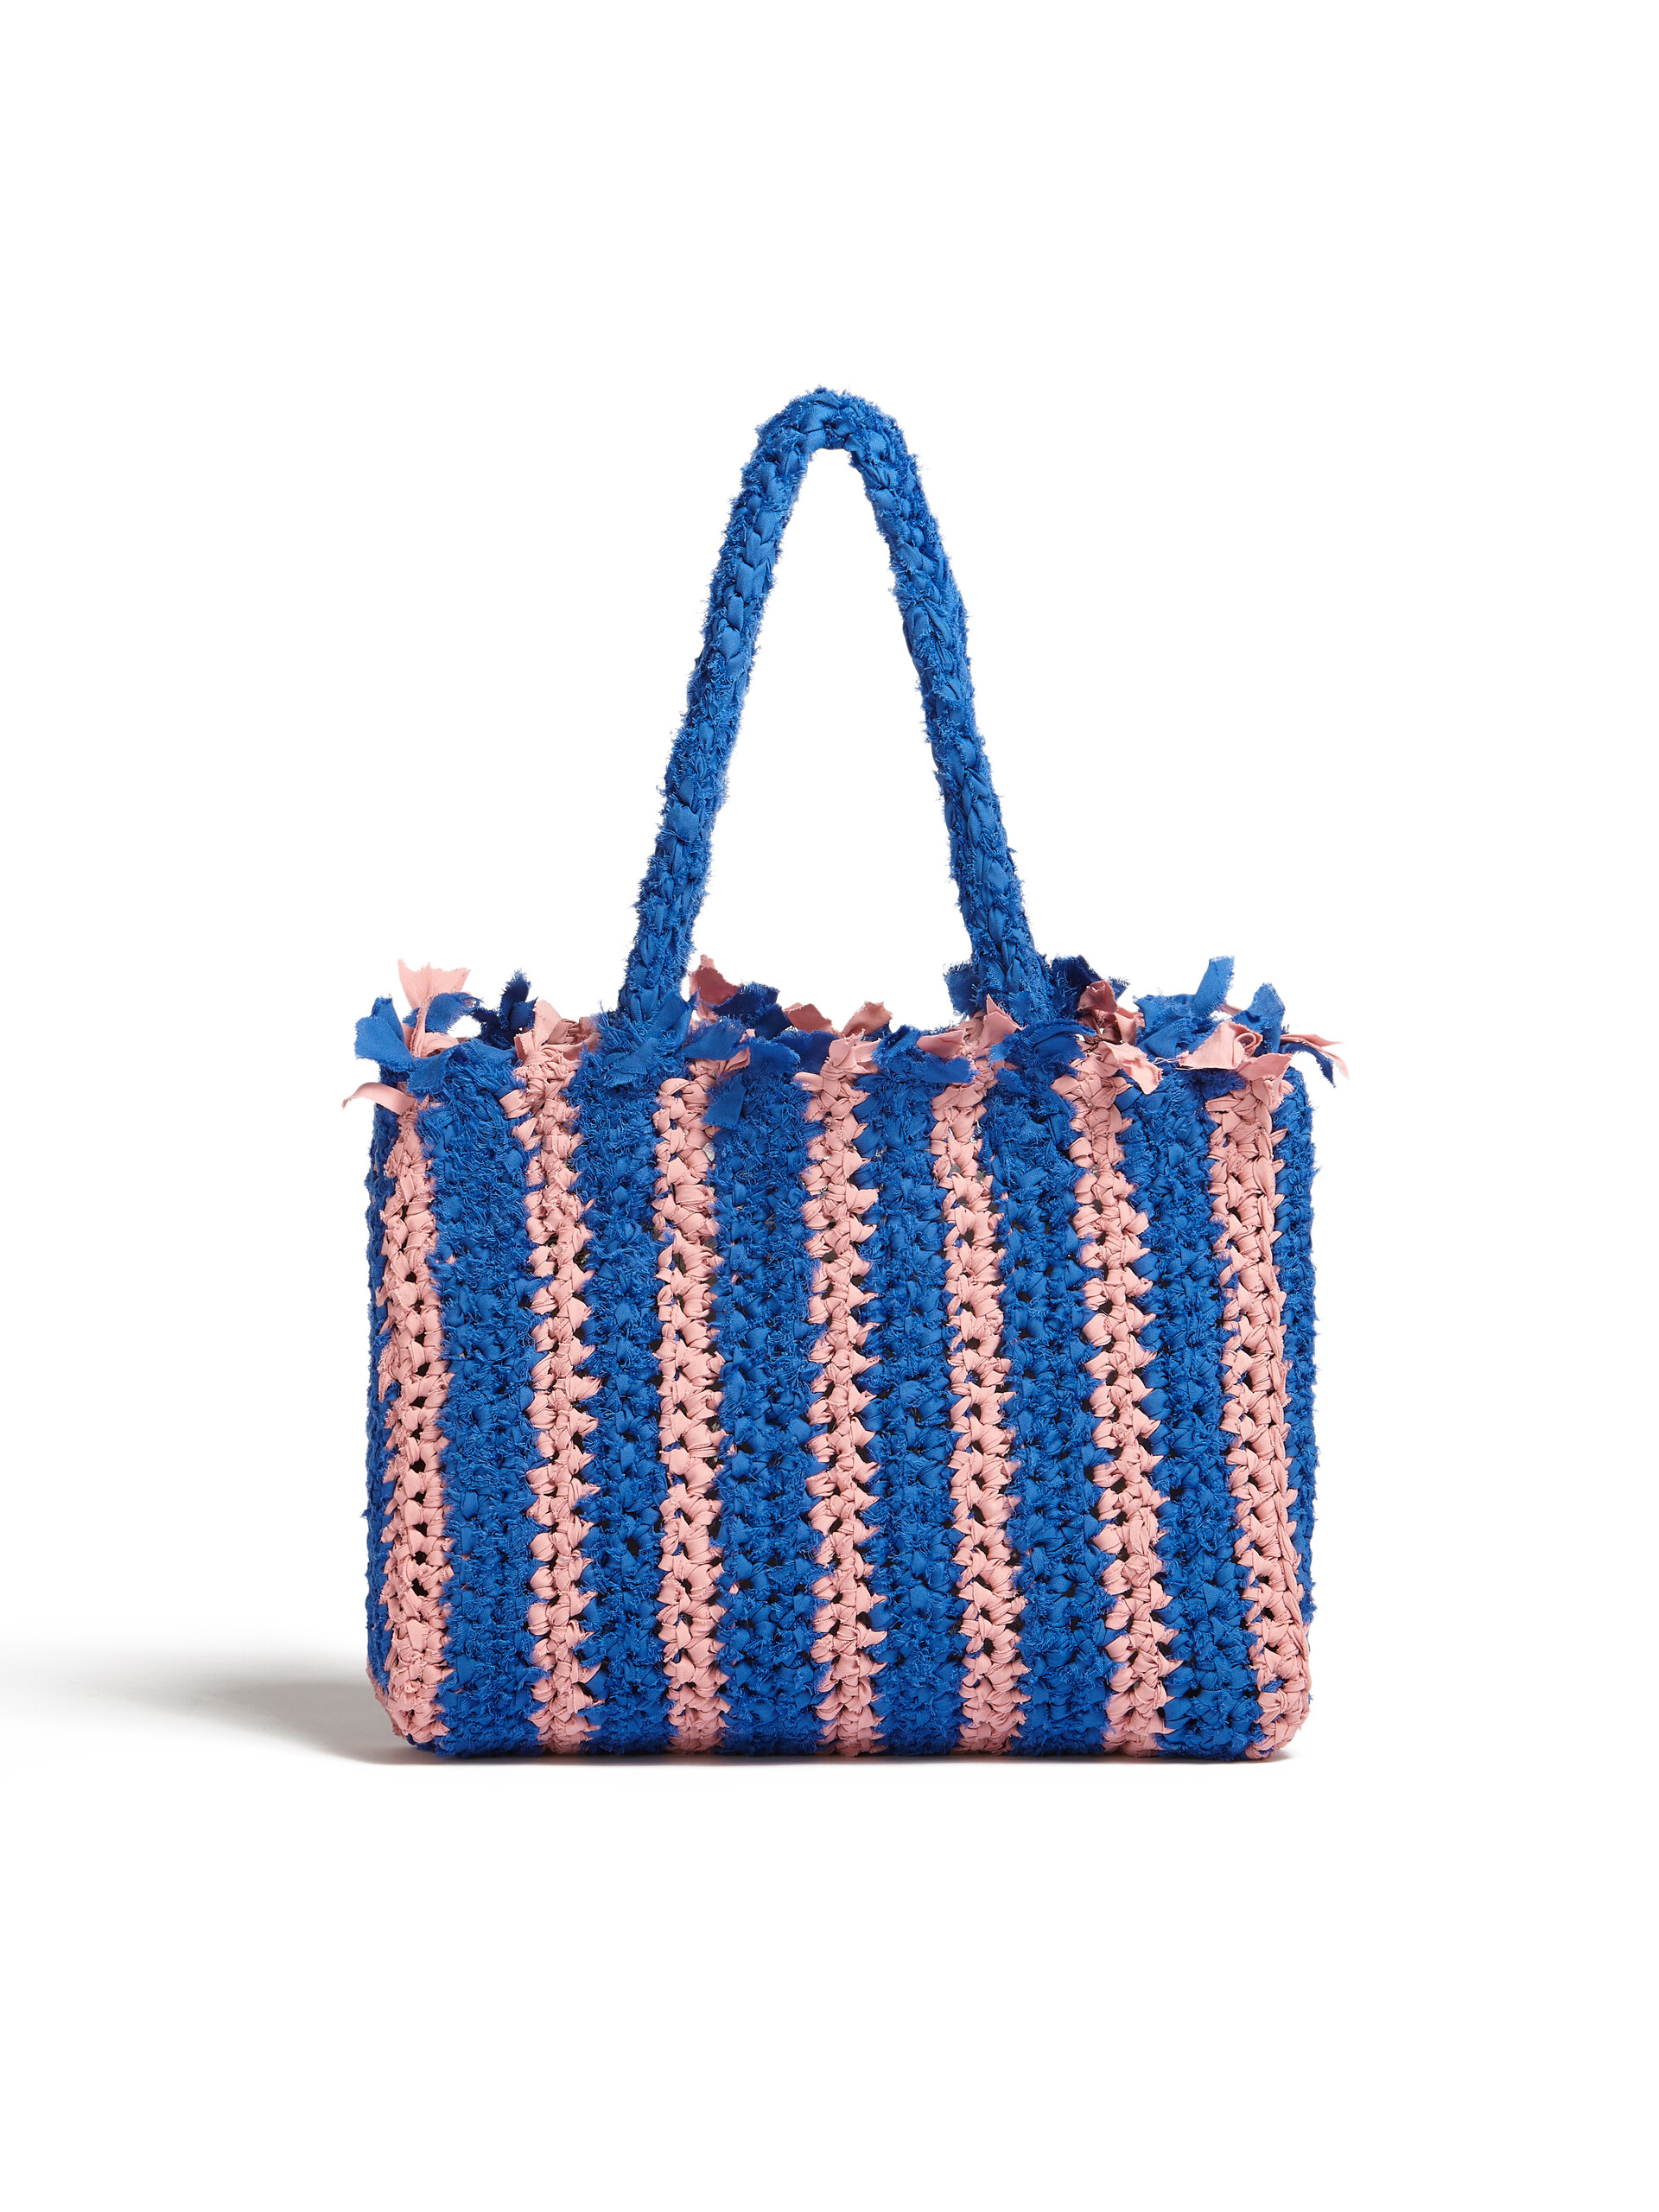 Pink and blue cotton MARNI MARKET bag - Bags - Image 3